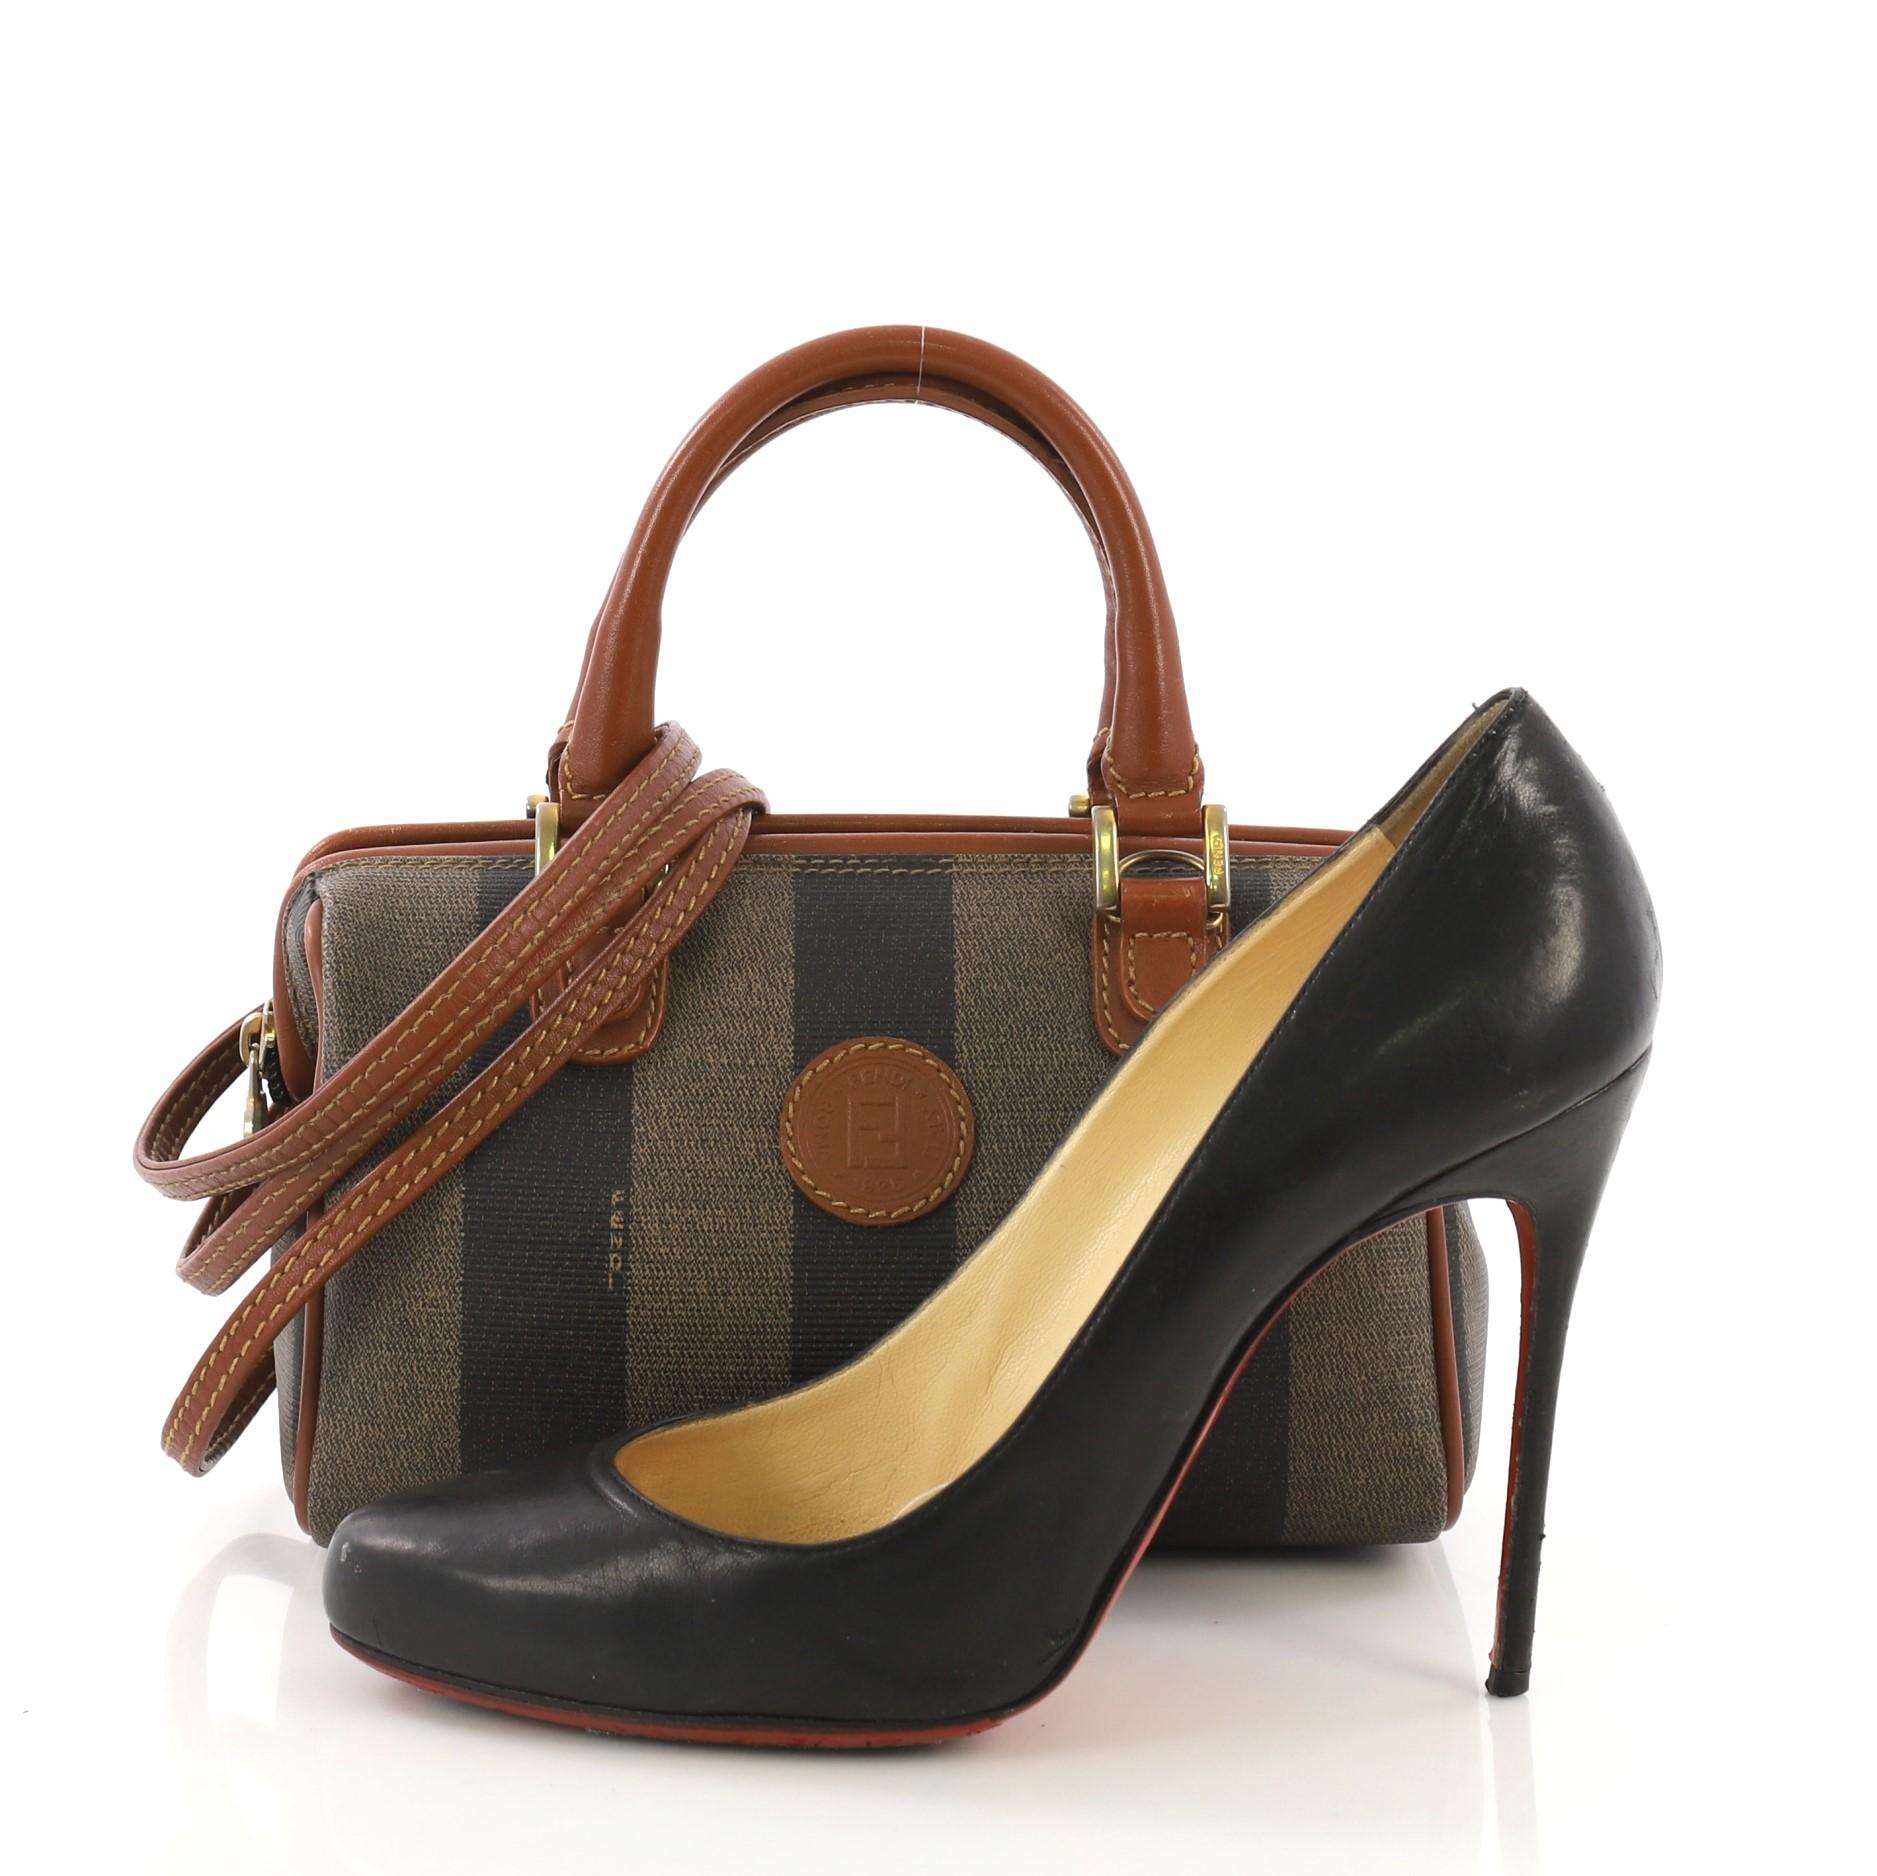 This Fendi Vintage Pequin Convertible Boston Bag Coated Canvas Mini, crafted in brown and black coated canvas, features dual rolled leather handles and gold-tone hardware. Its zip closure opens to a black leather interior. **Note: Shoe photographed